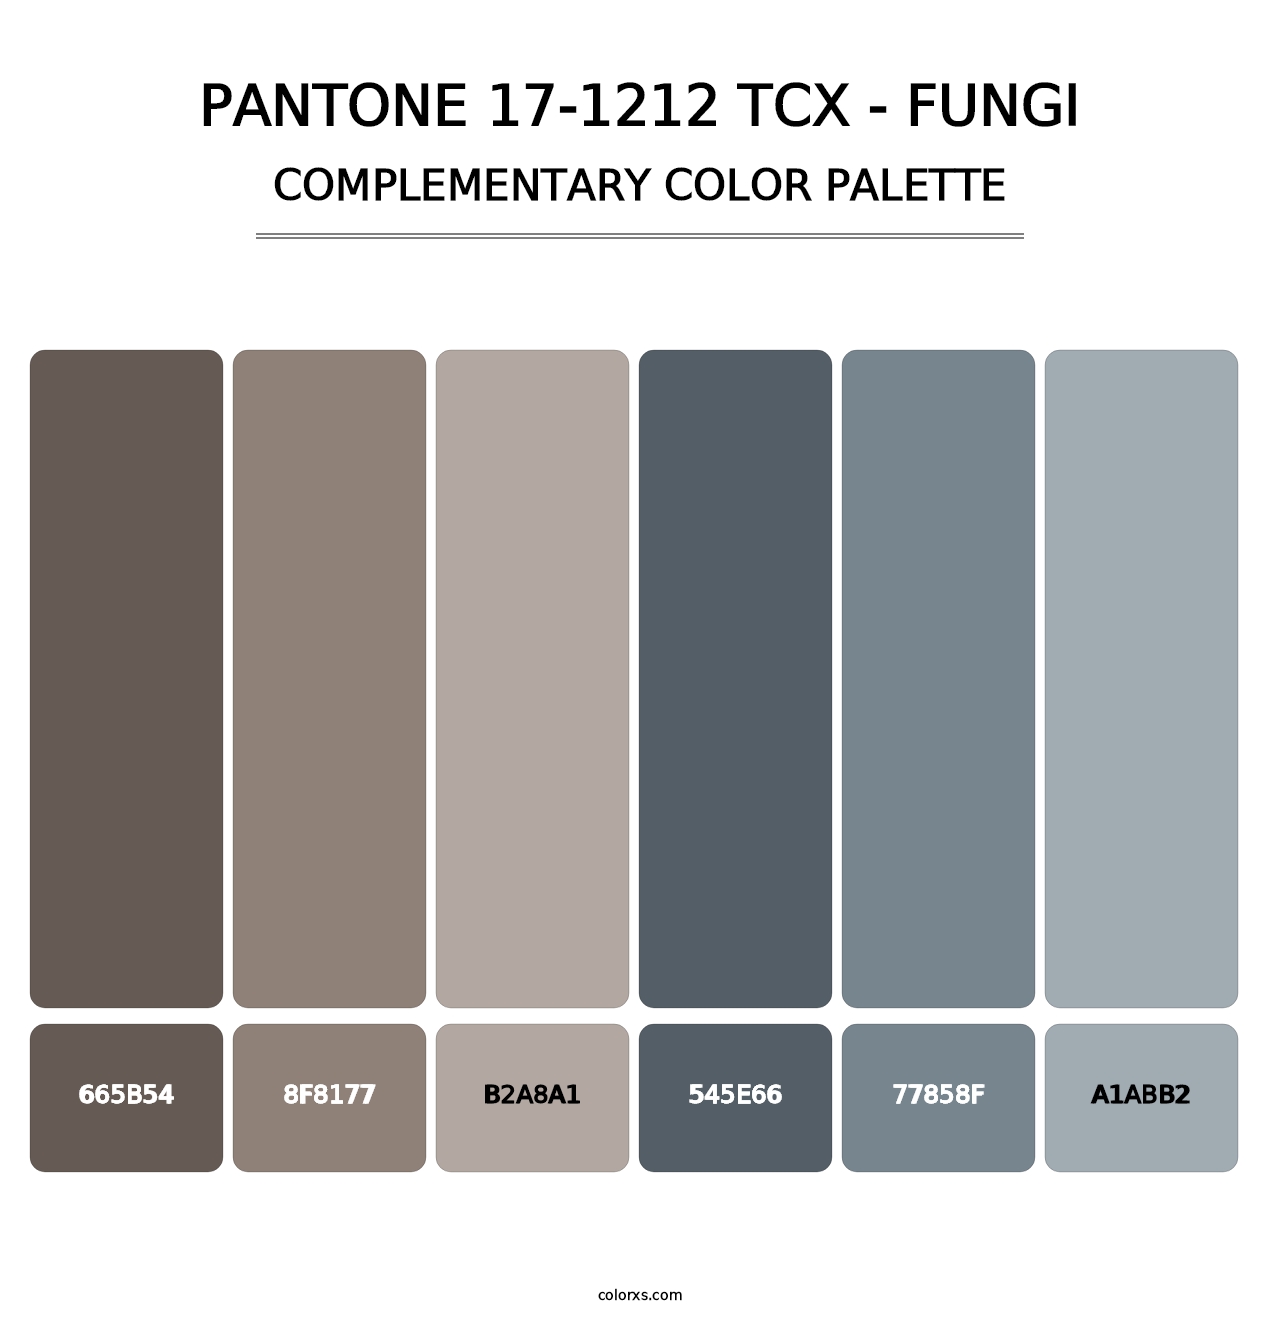 PANTONE 17-1212 TCX - Fungi - Complementary Color Palette